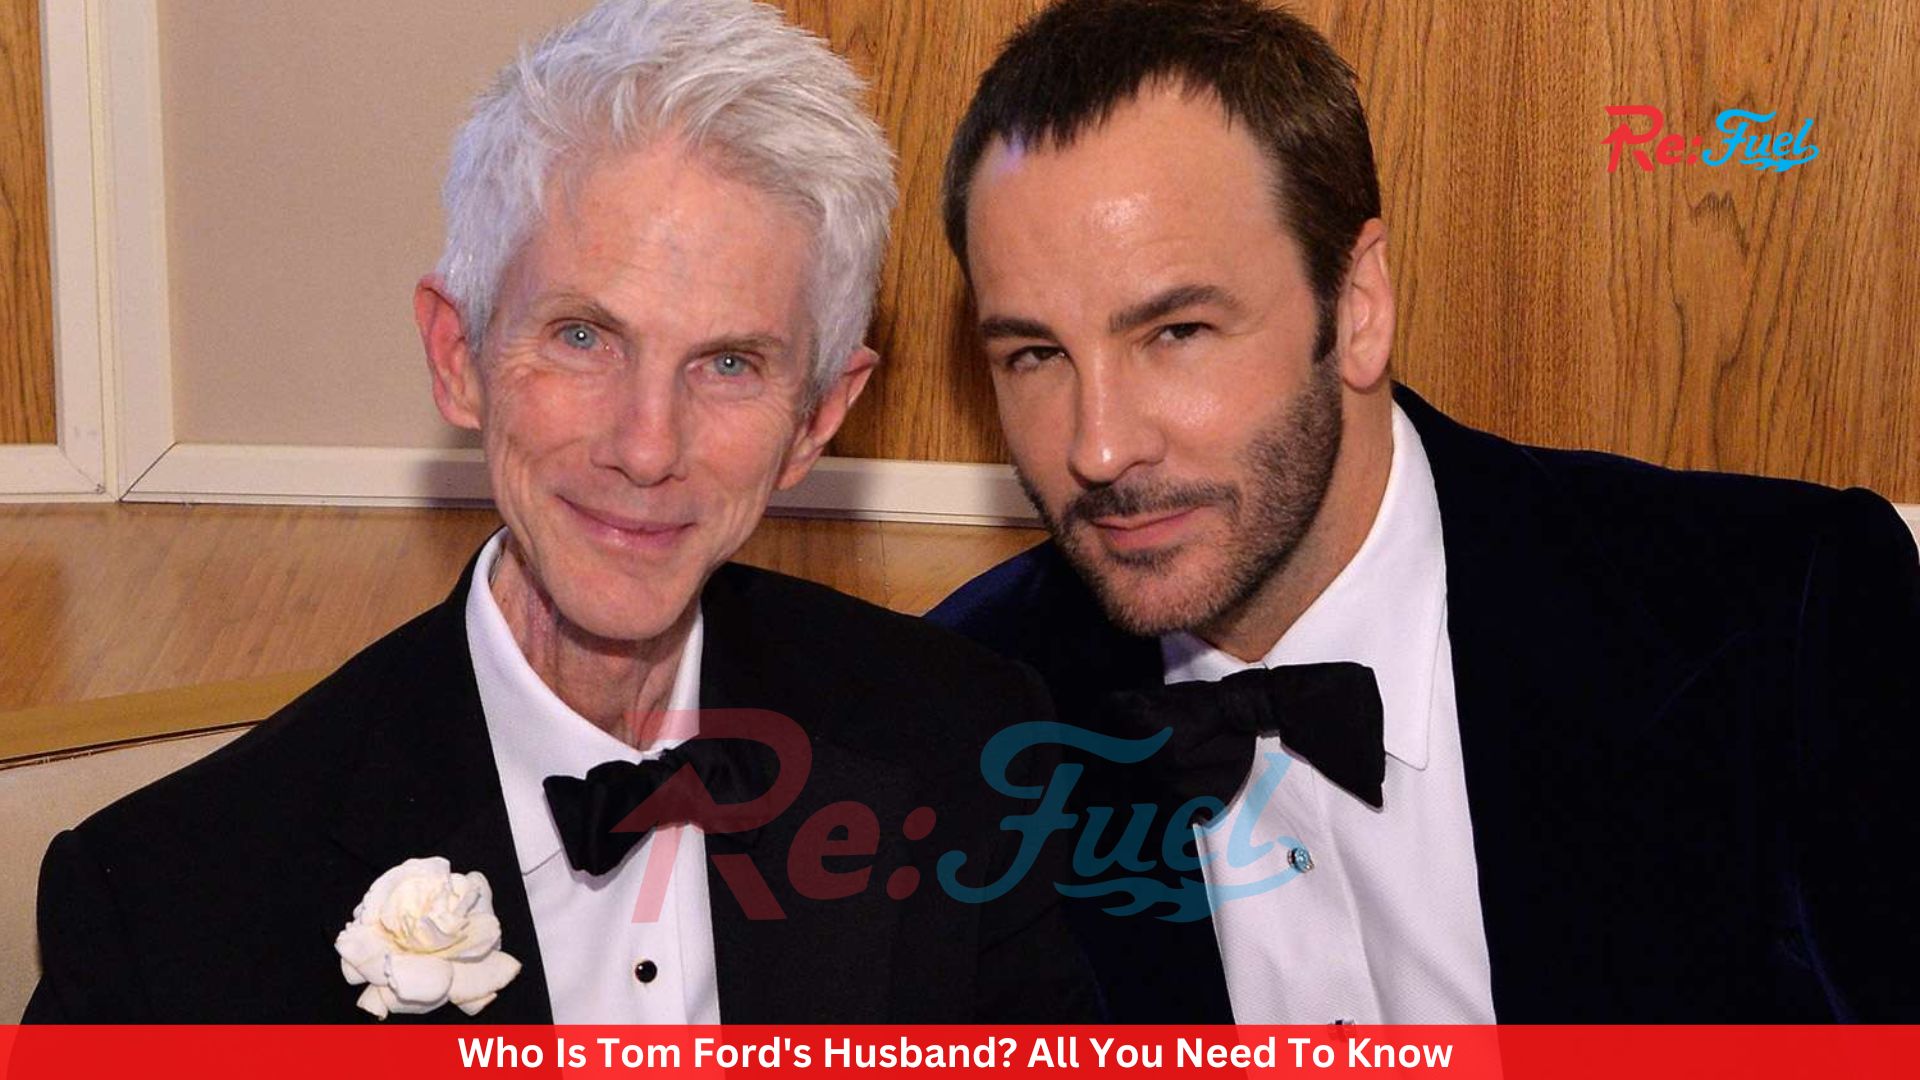 Who Is Tom Ford's Husband? All You Need To Know